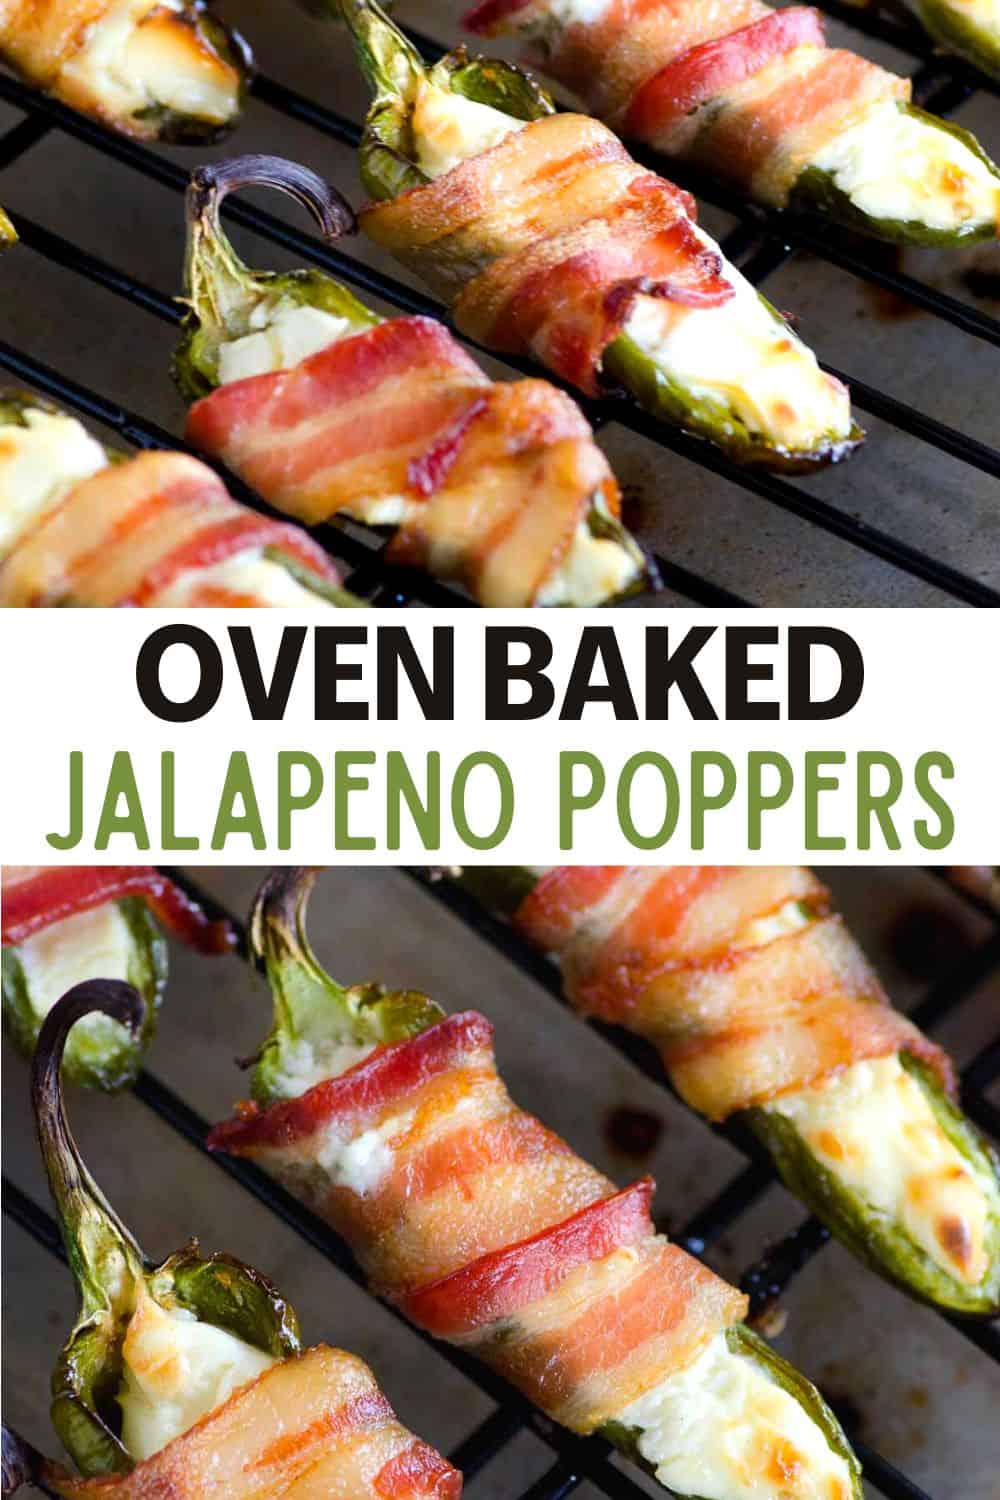 Bacon wrapped jalapeno peppers stuffed with cream cheese is the ultimate game day recipe!